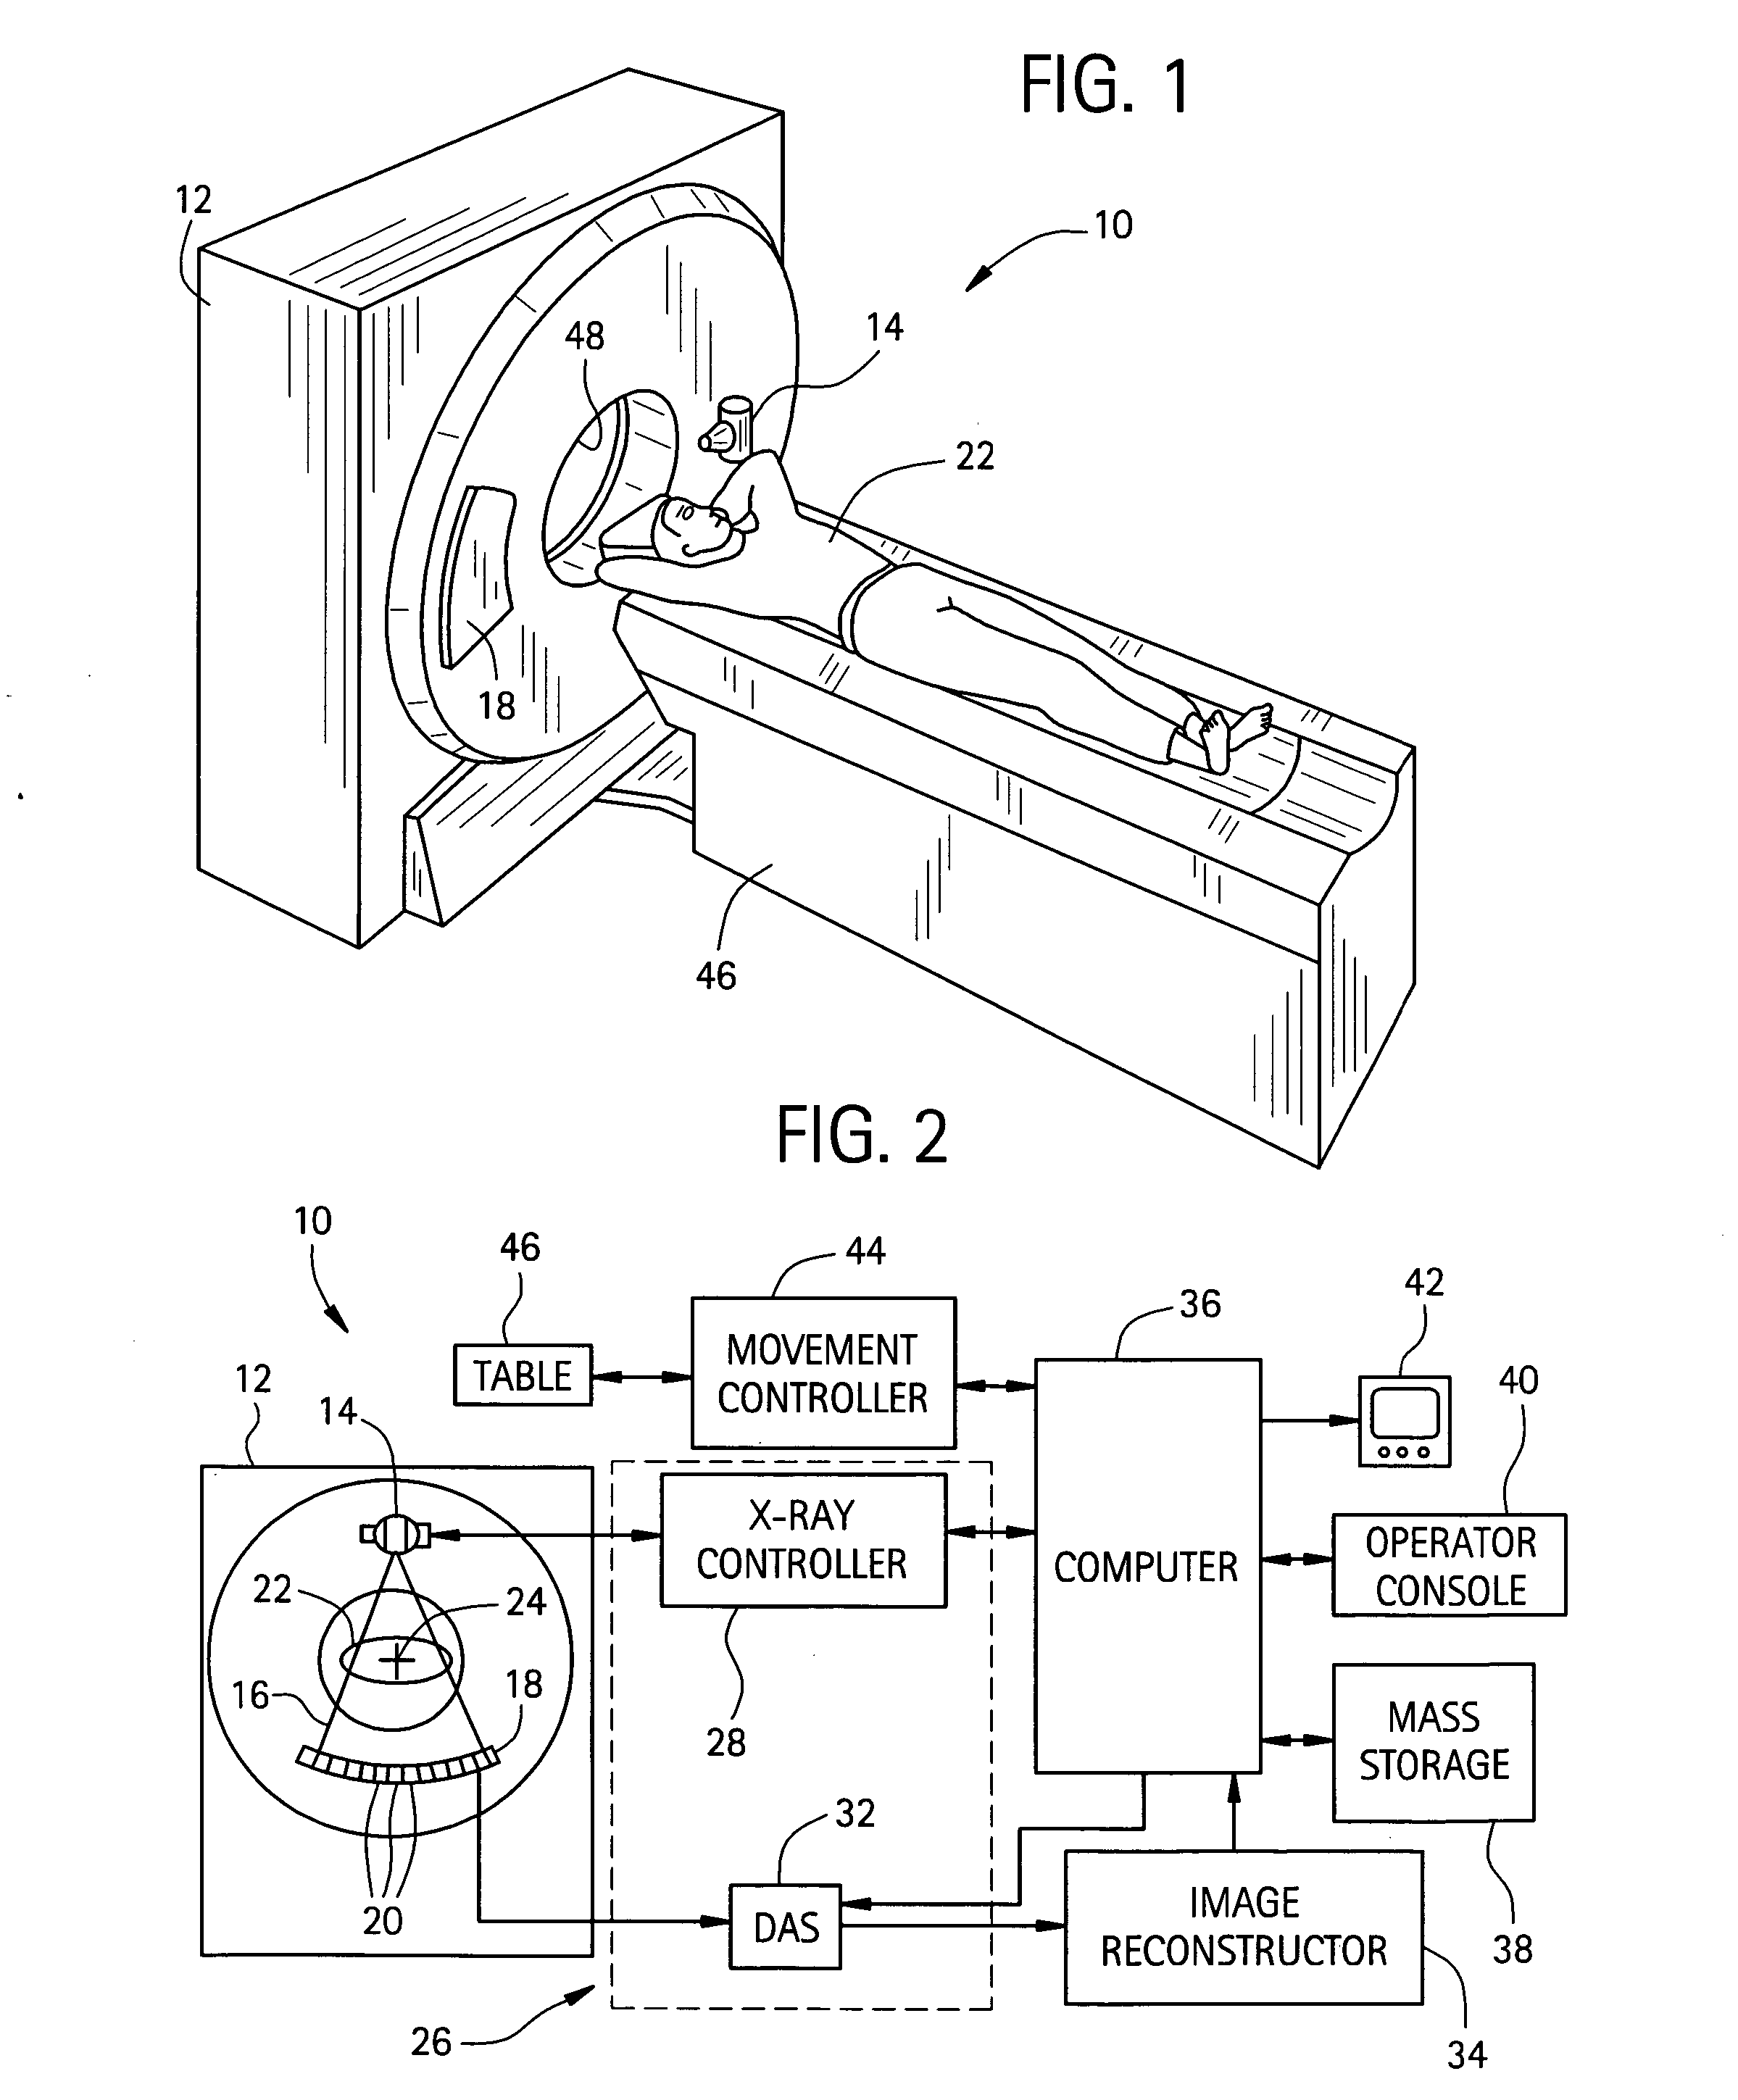 System and method for defective detector cell and DAS channel correction